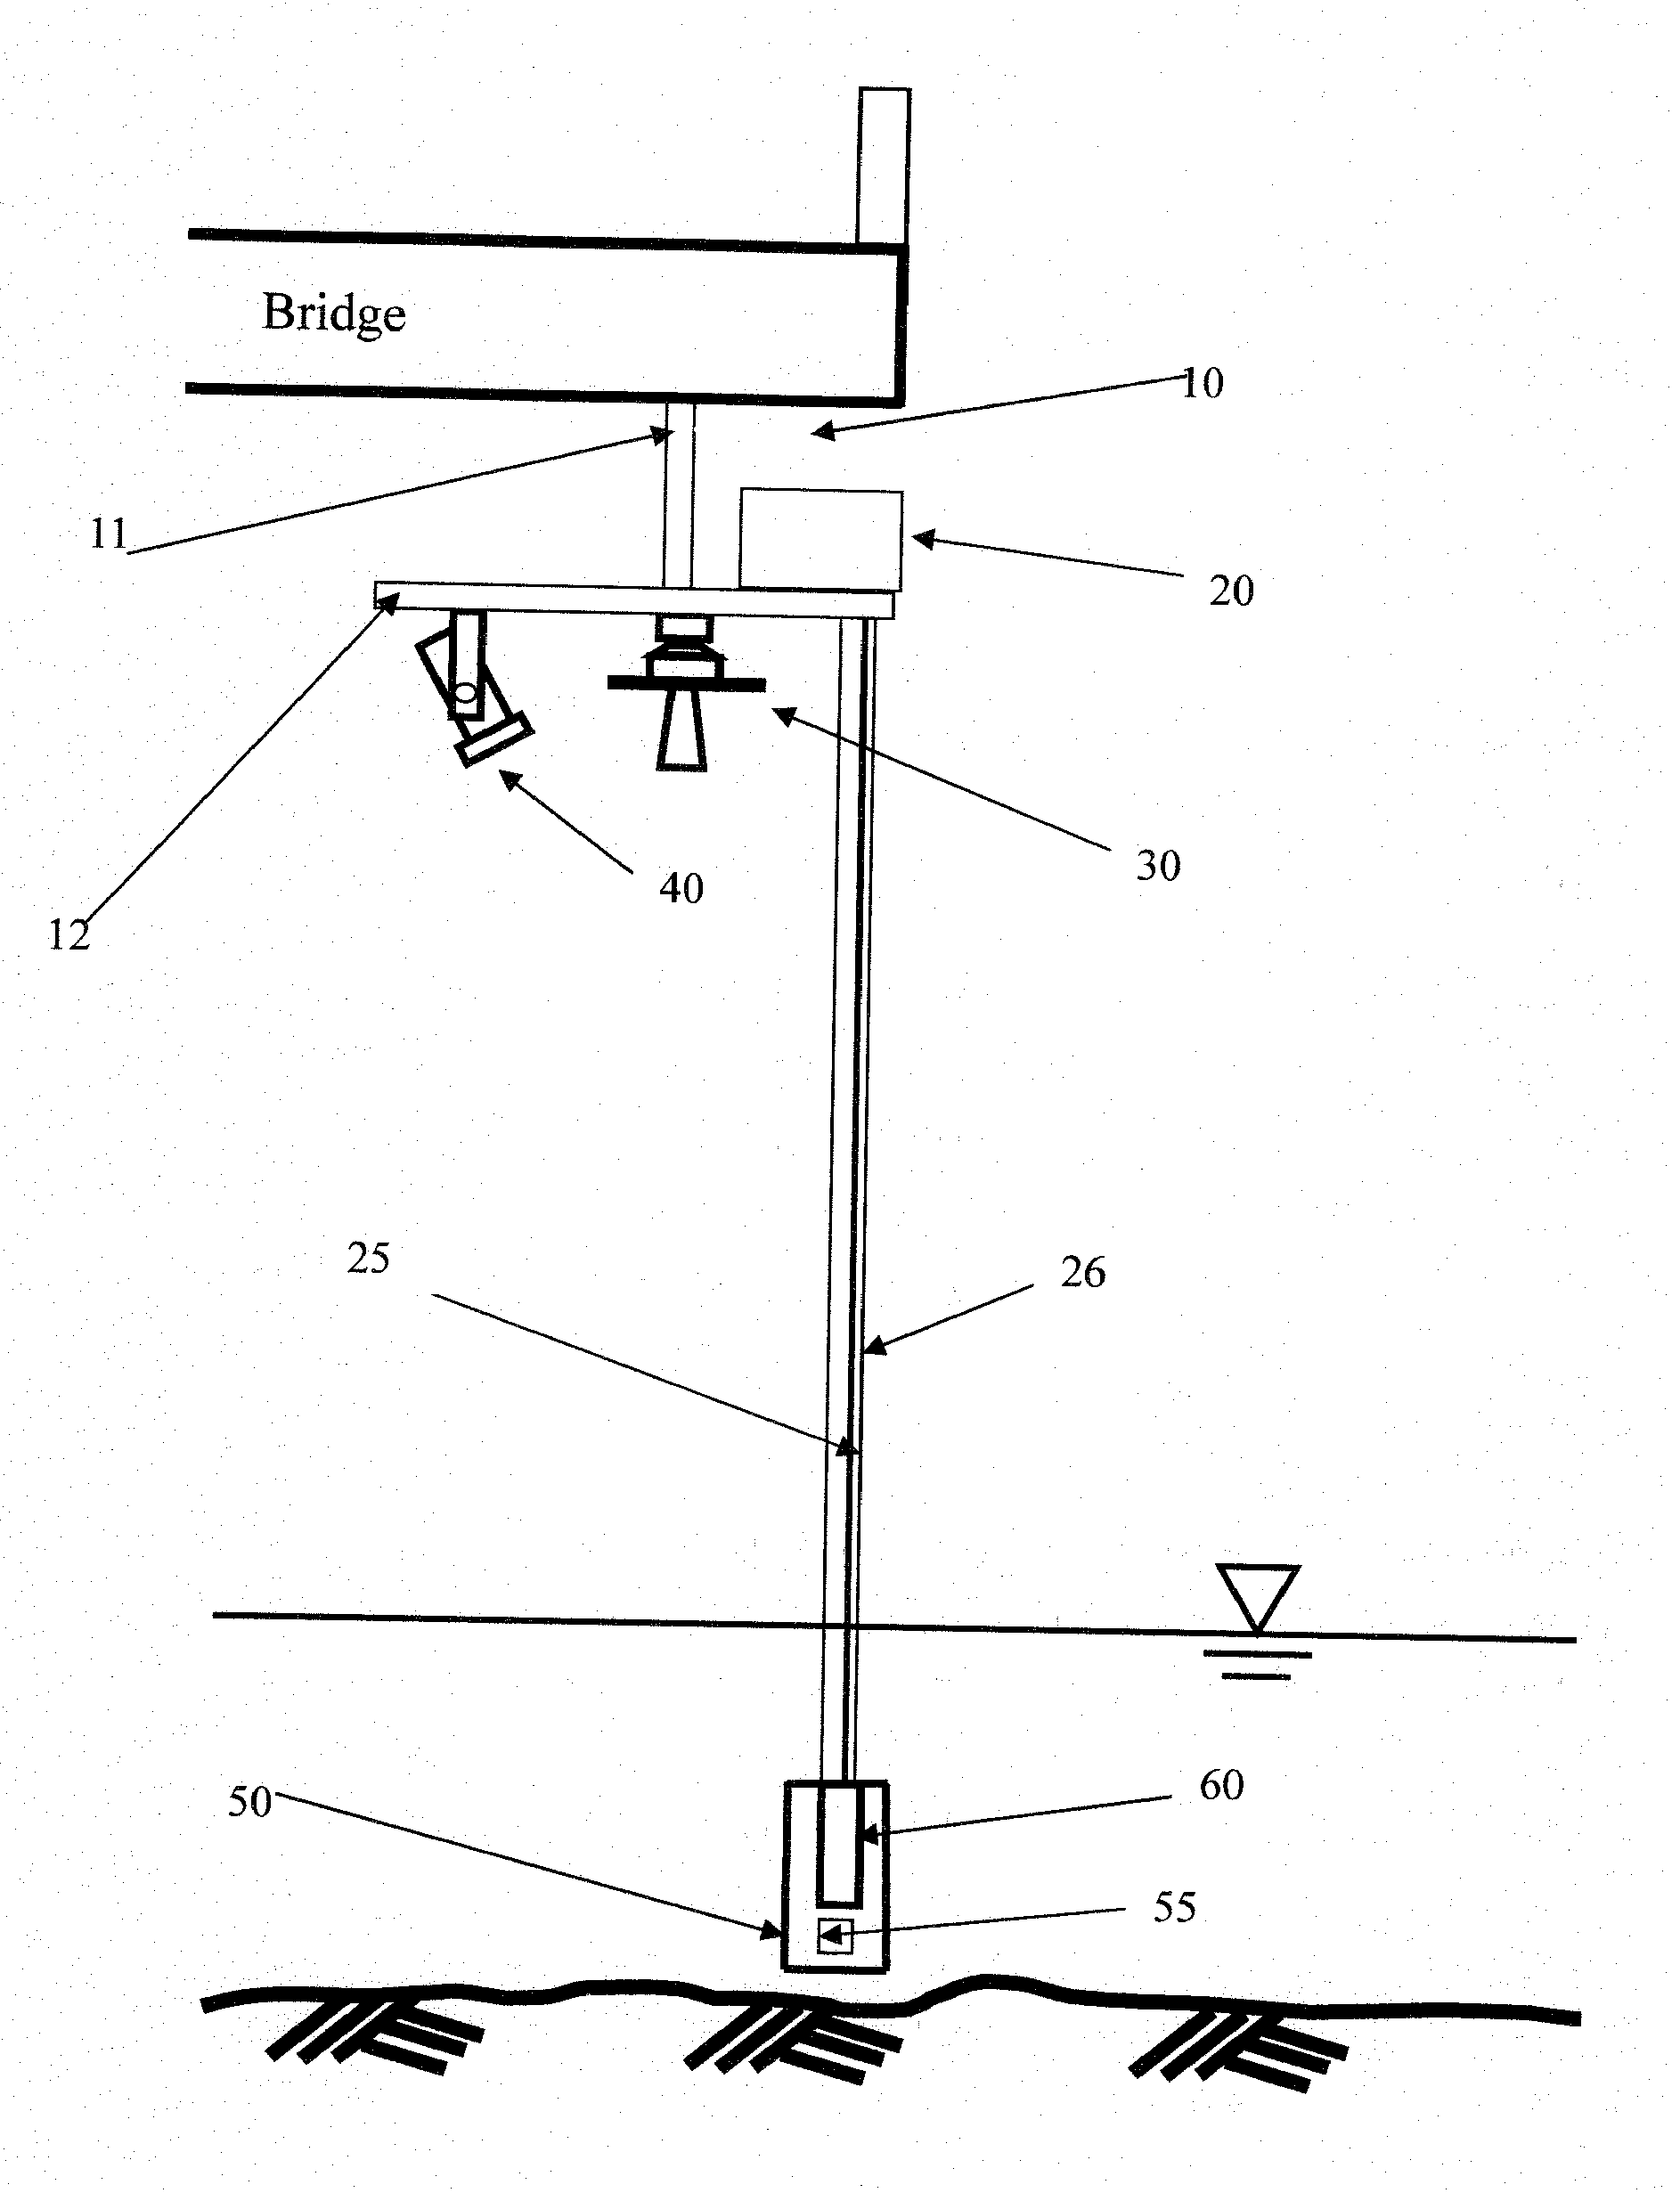 Automatic hydrologic parameter measuring system for river flow and the method using the same